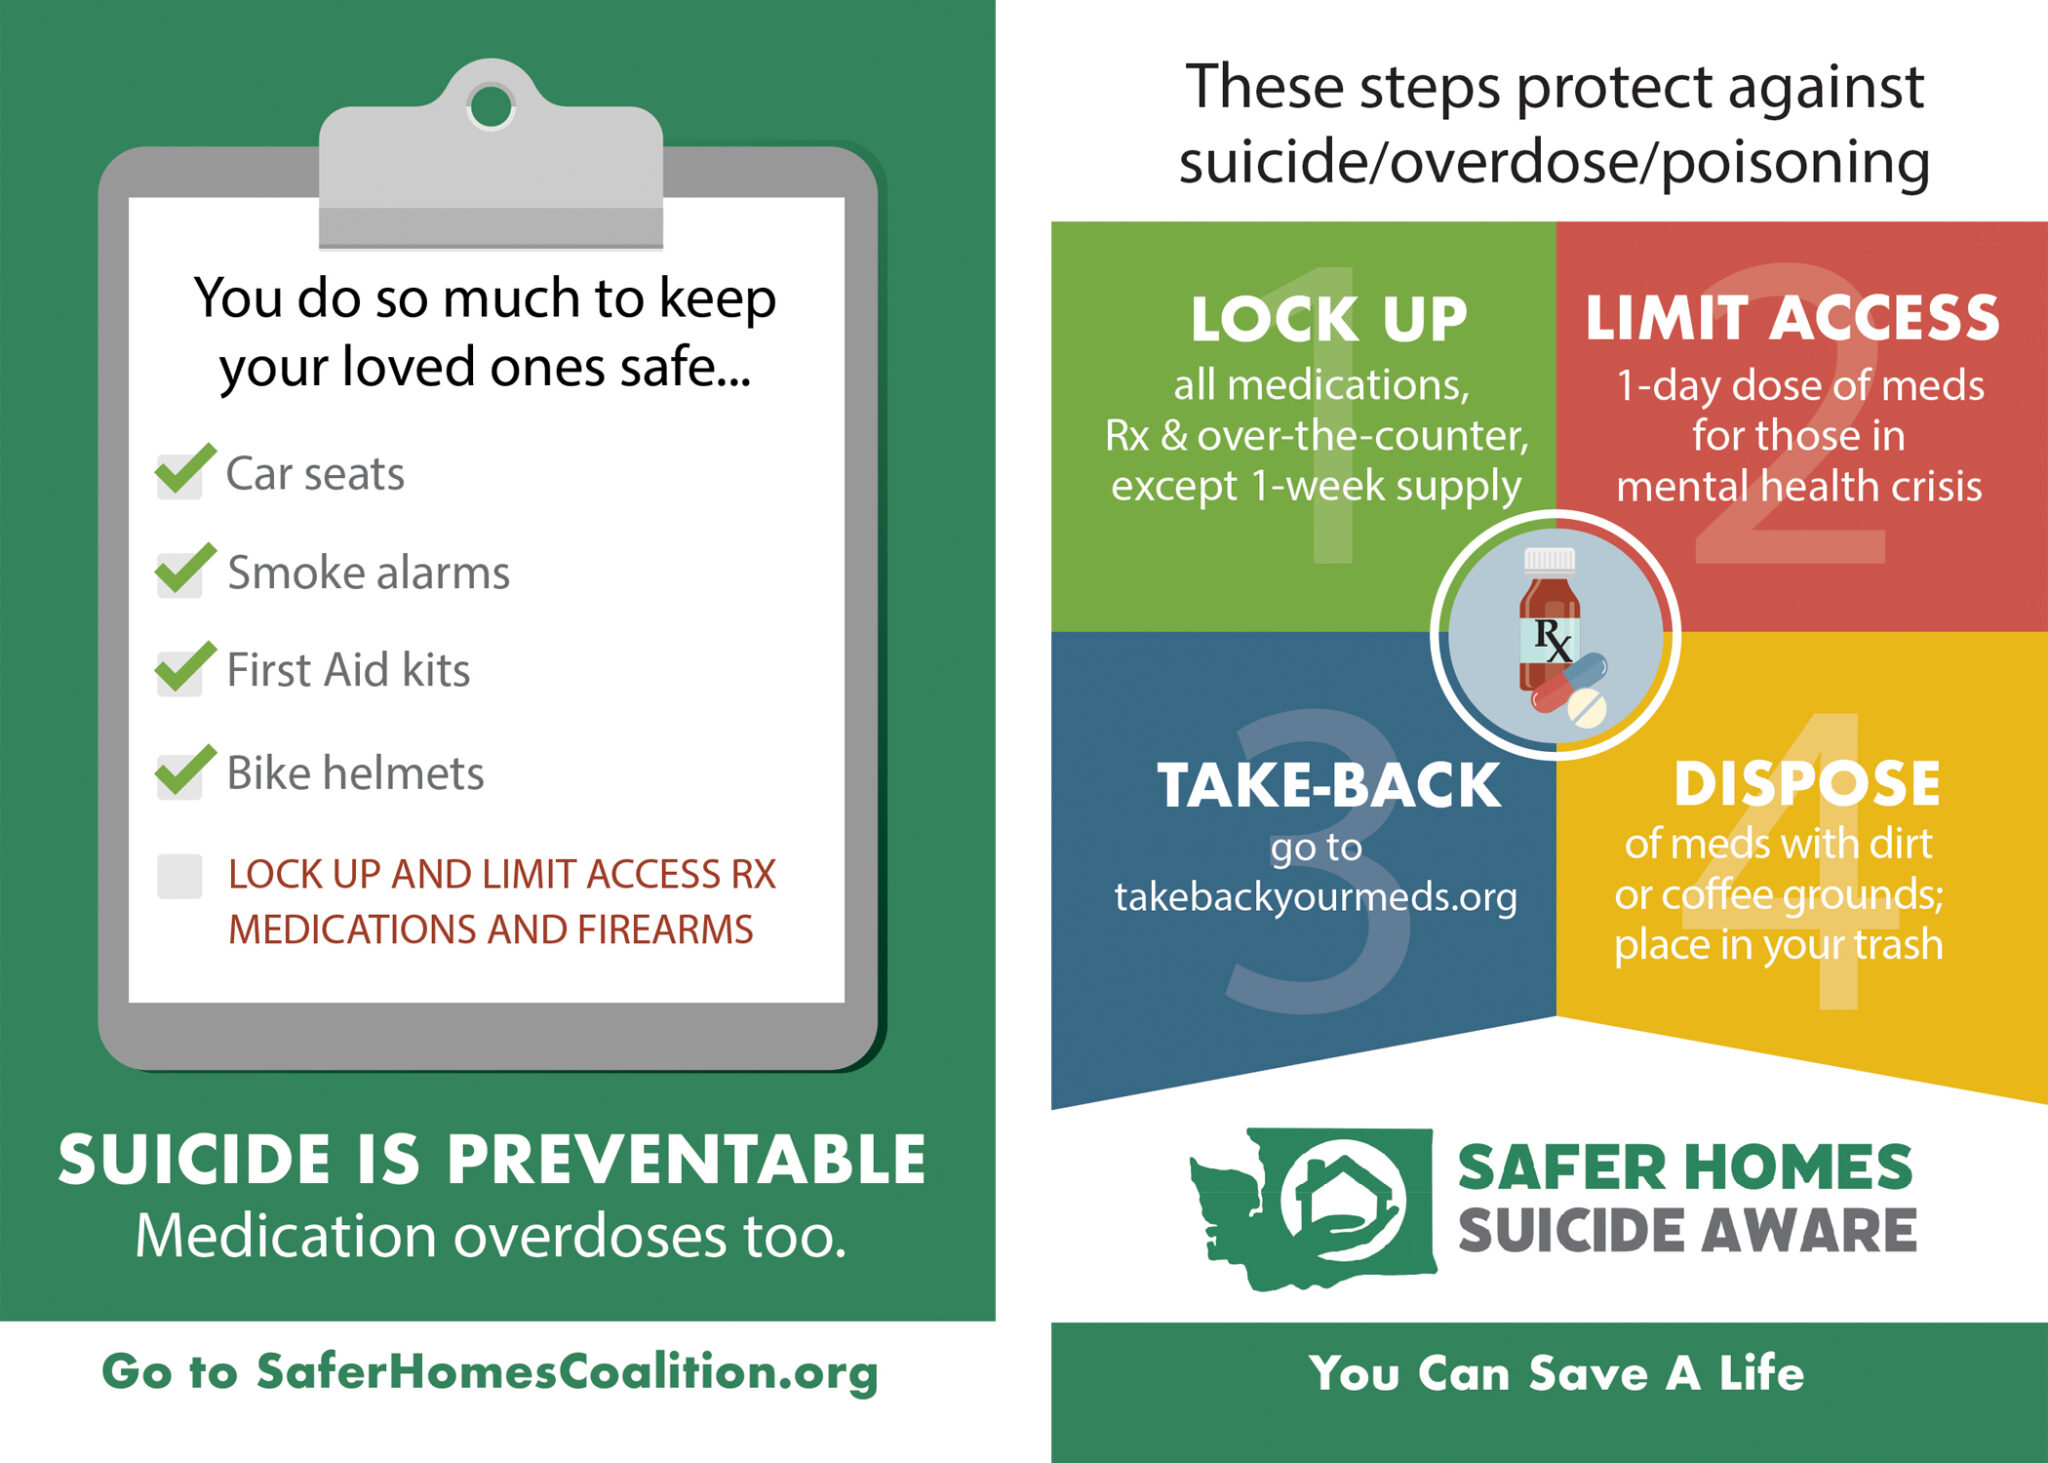 Infographic: Safer Homes Suicide Aware Training Materials